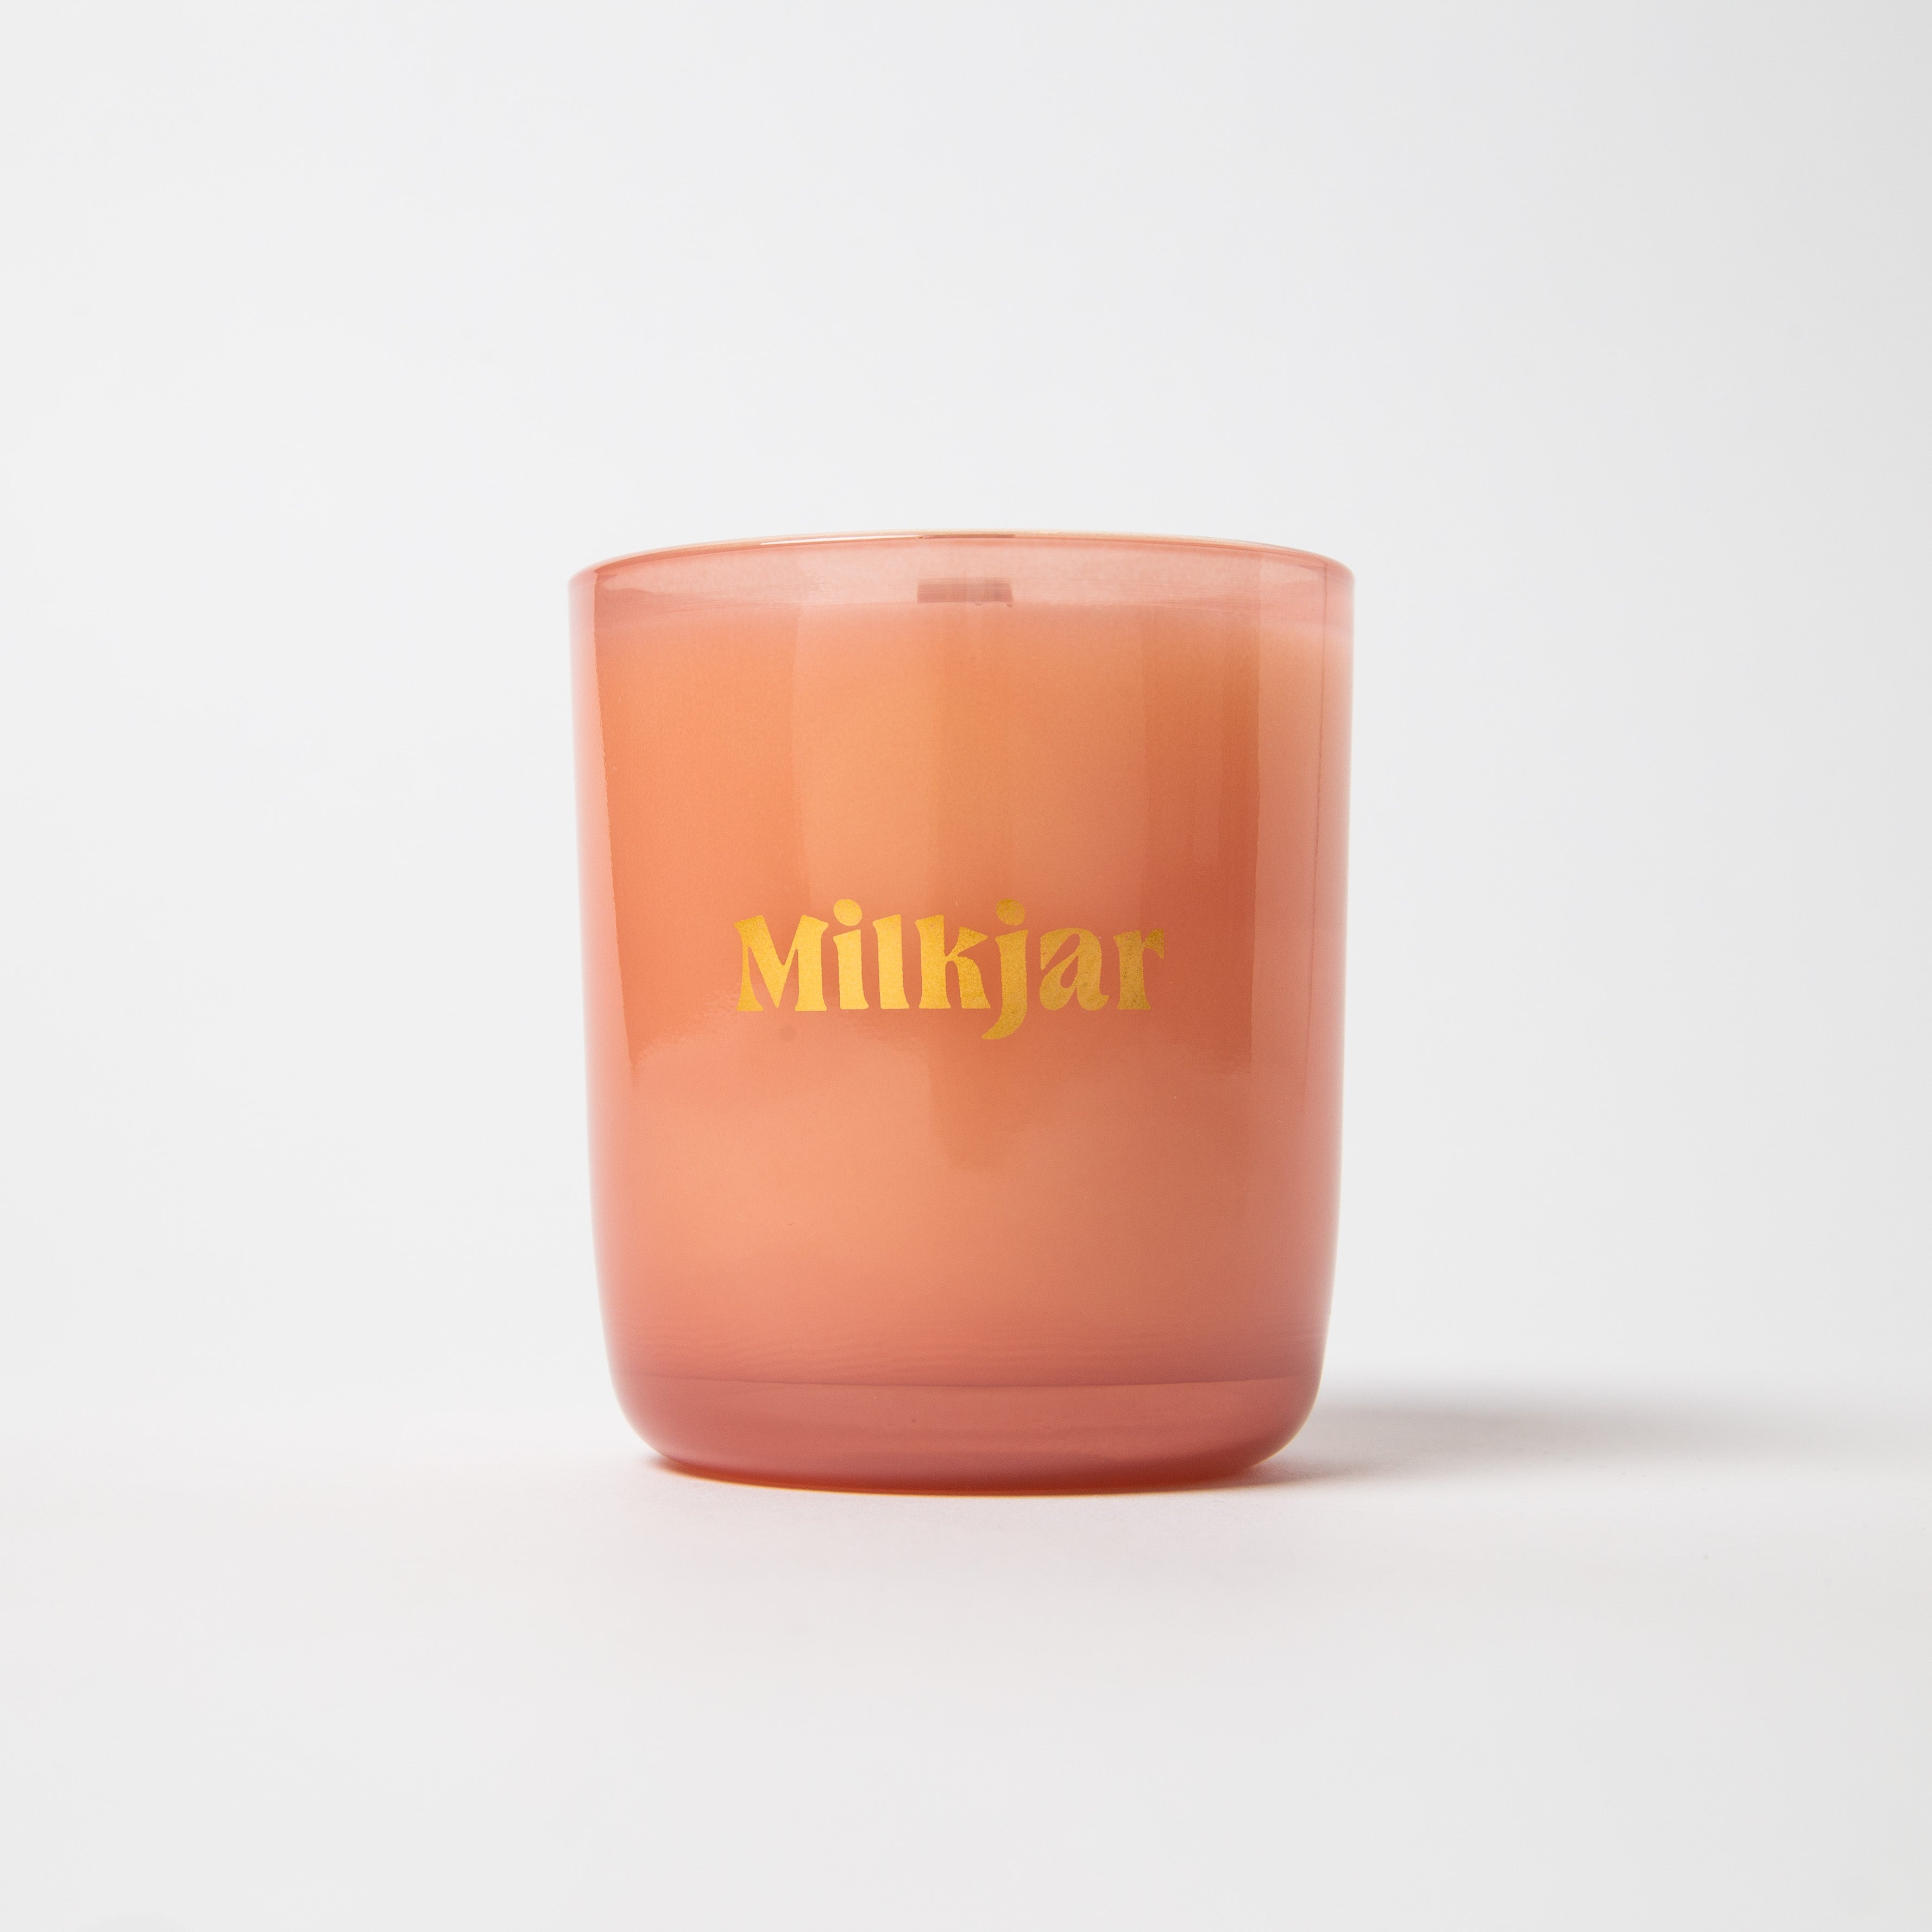 GARDEN STATE Cedar + Cassis Coconut Soy Candle